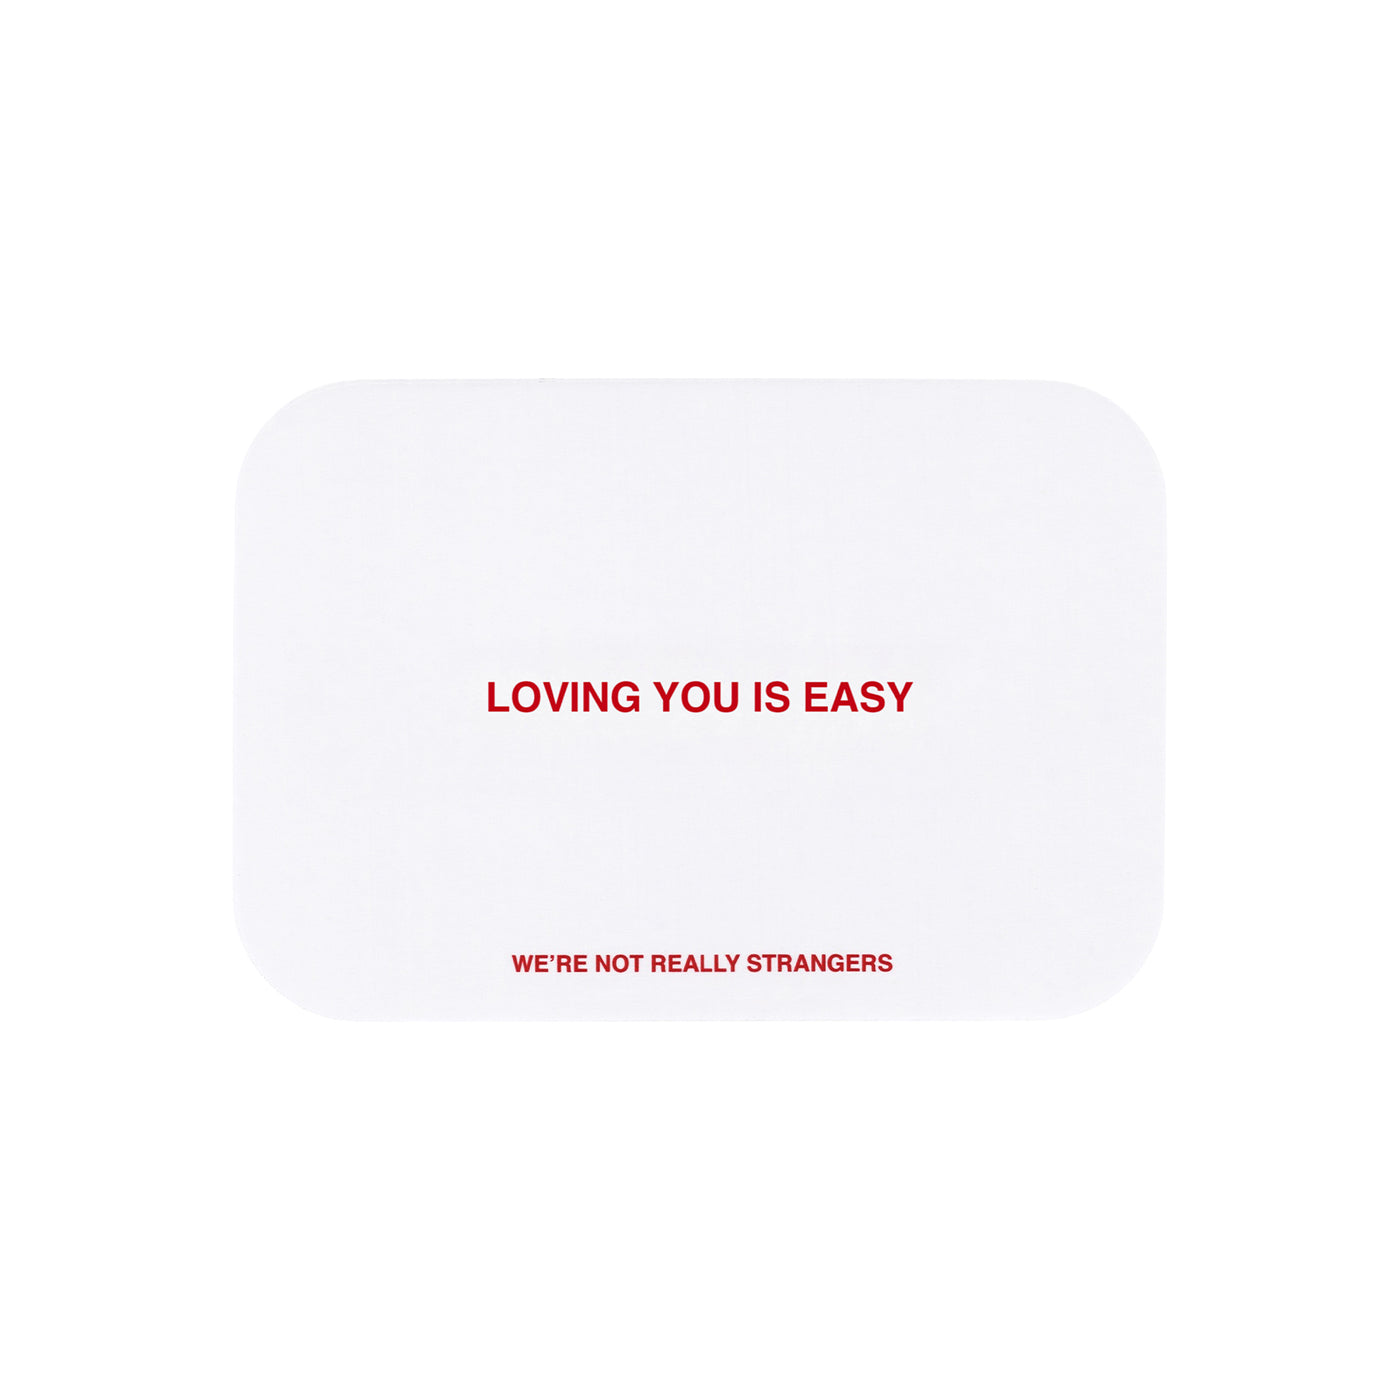 We're Not Really Strangers E-Gift Card. Front facing view of white card option reading "Loving you is easy" in red font.